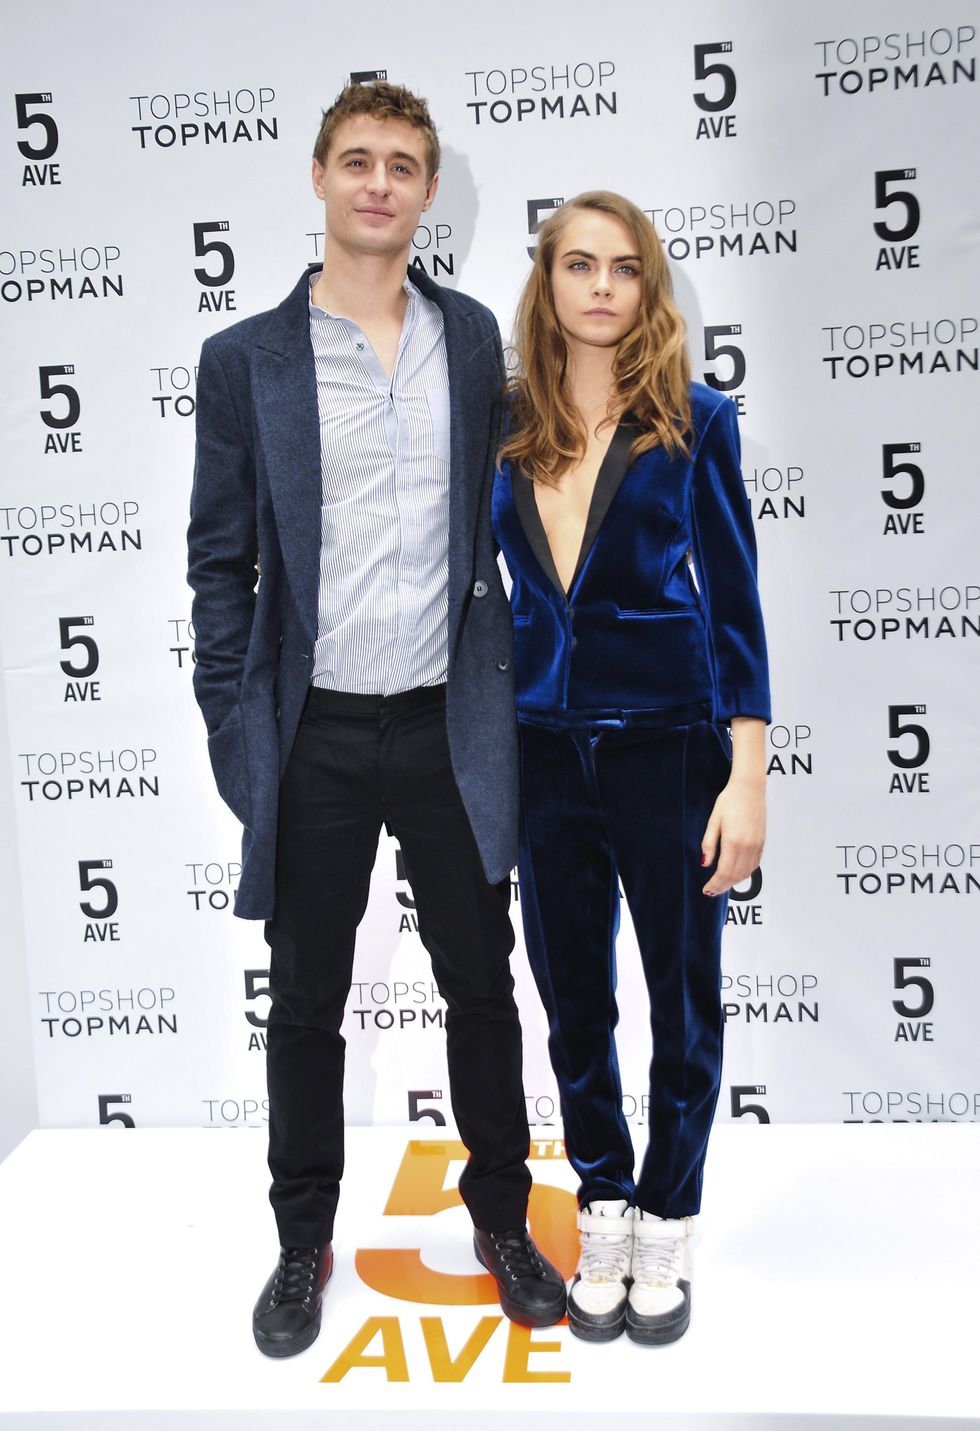 Cara Delevingne suits up in navy velvet for the Topshop launch in New York with Max Irons